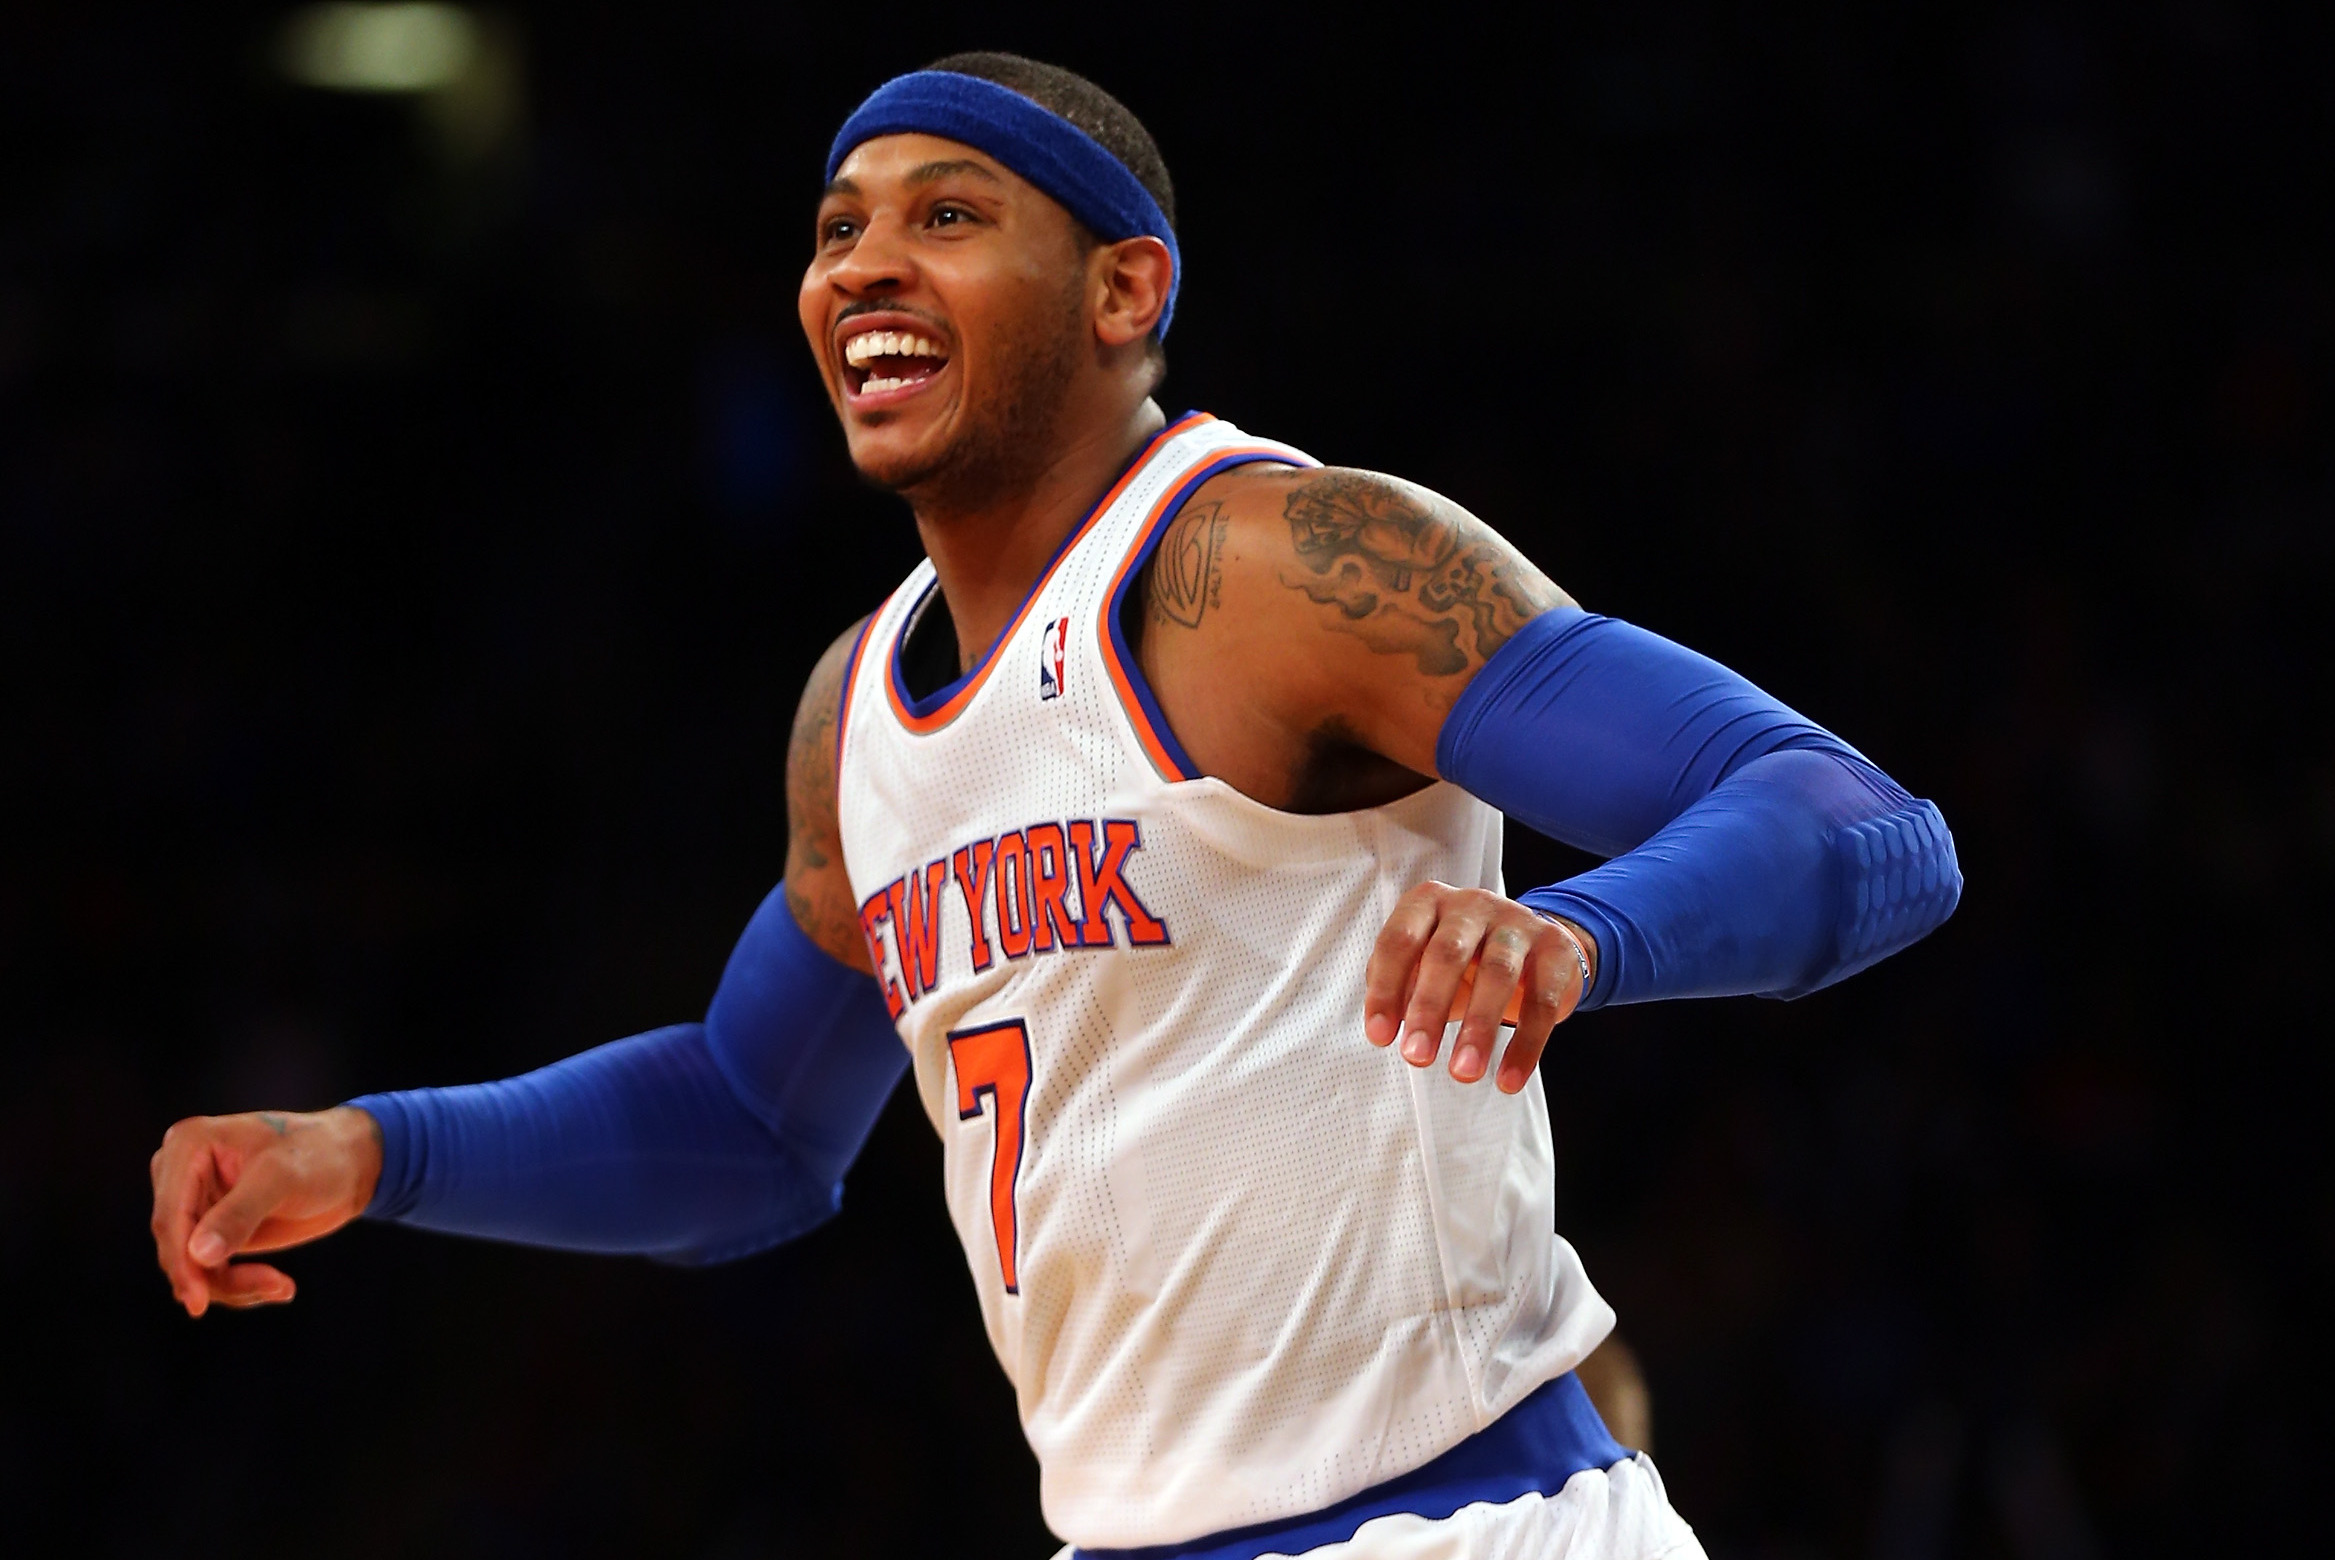 This is Carmelo Anthony and he is a 6'8 Small Forward. He plays